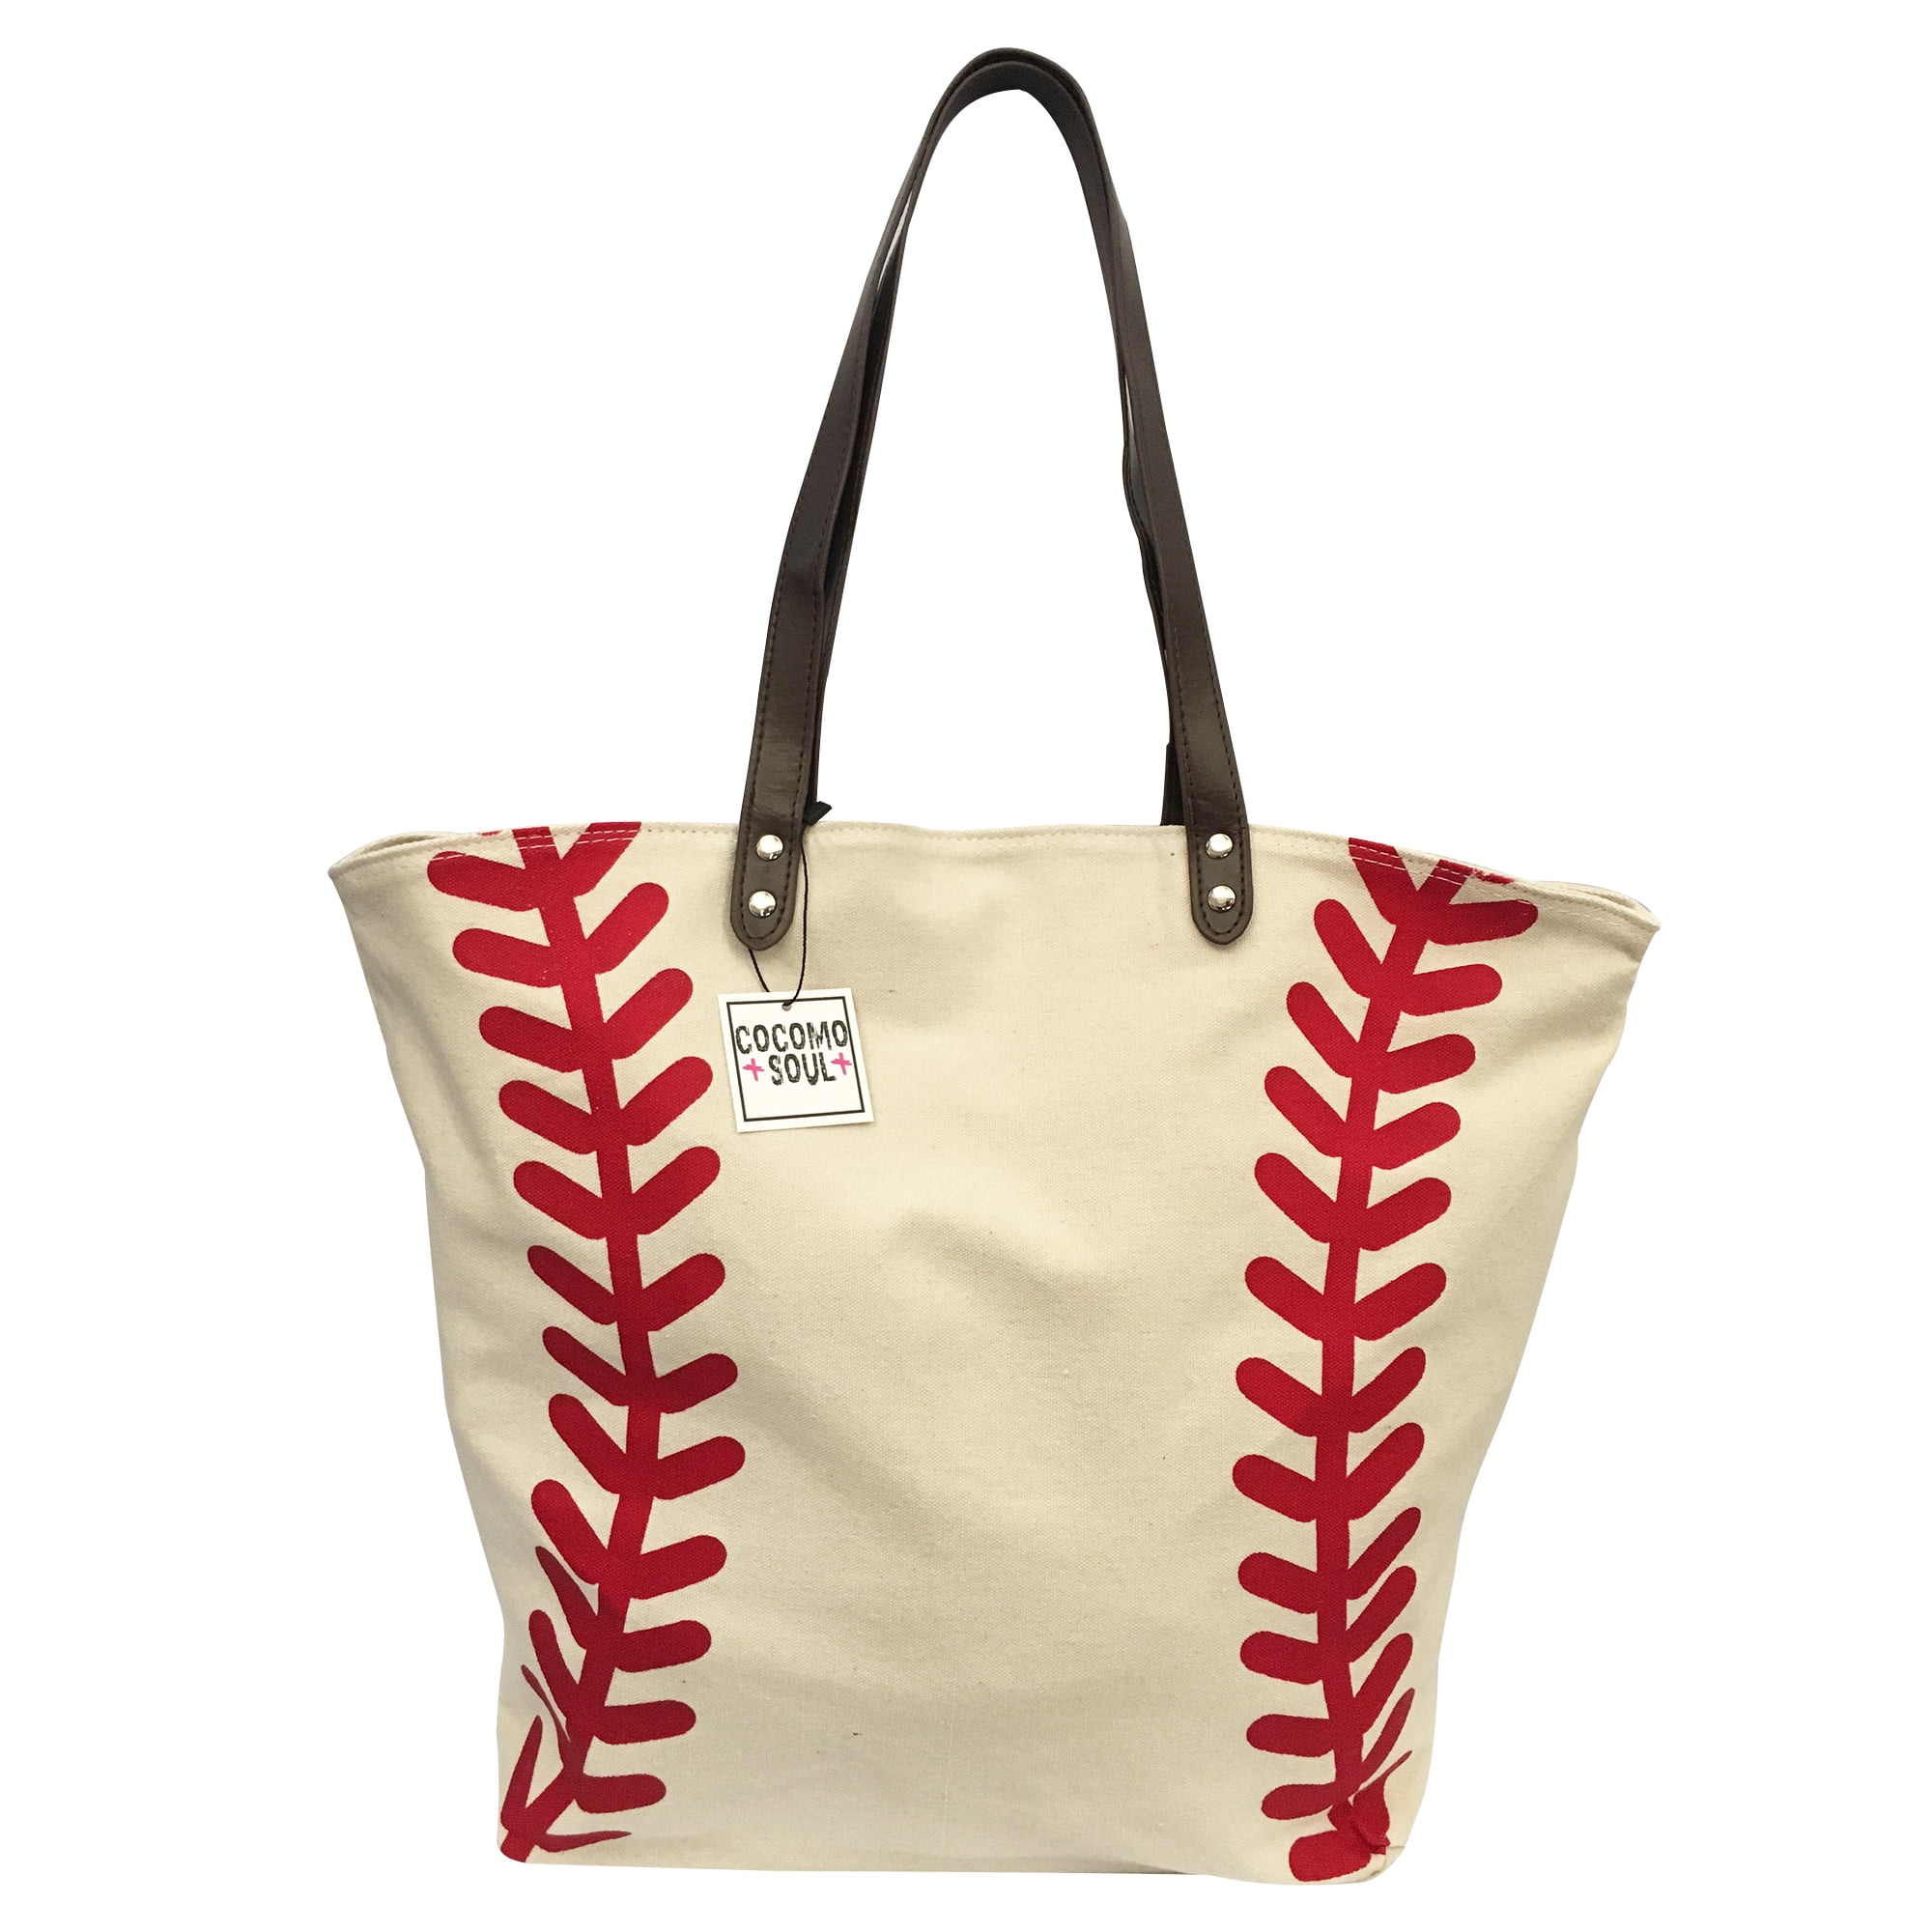 X-Large, White） XL Baseball Tote Bags Women Oversized White Canvas Utility Travel Handbag with Pockets Red Embroidery Baseball Prints Shoulder Handbag for Mom Fans Teens Kid Team Gifts